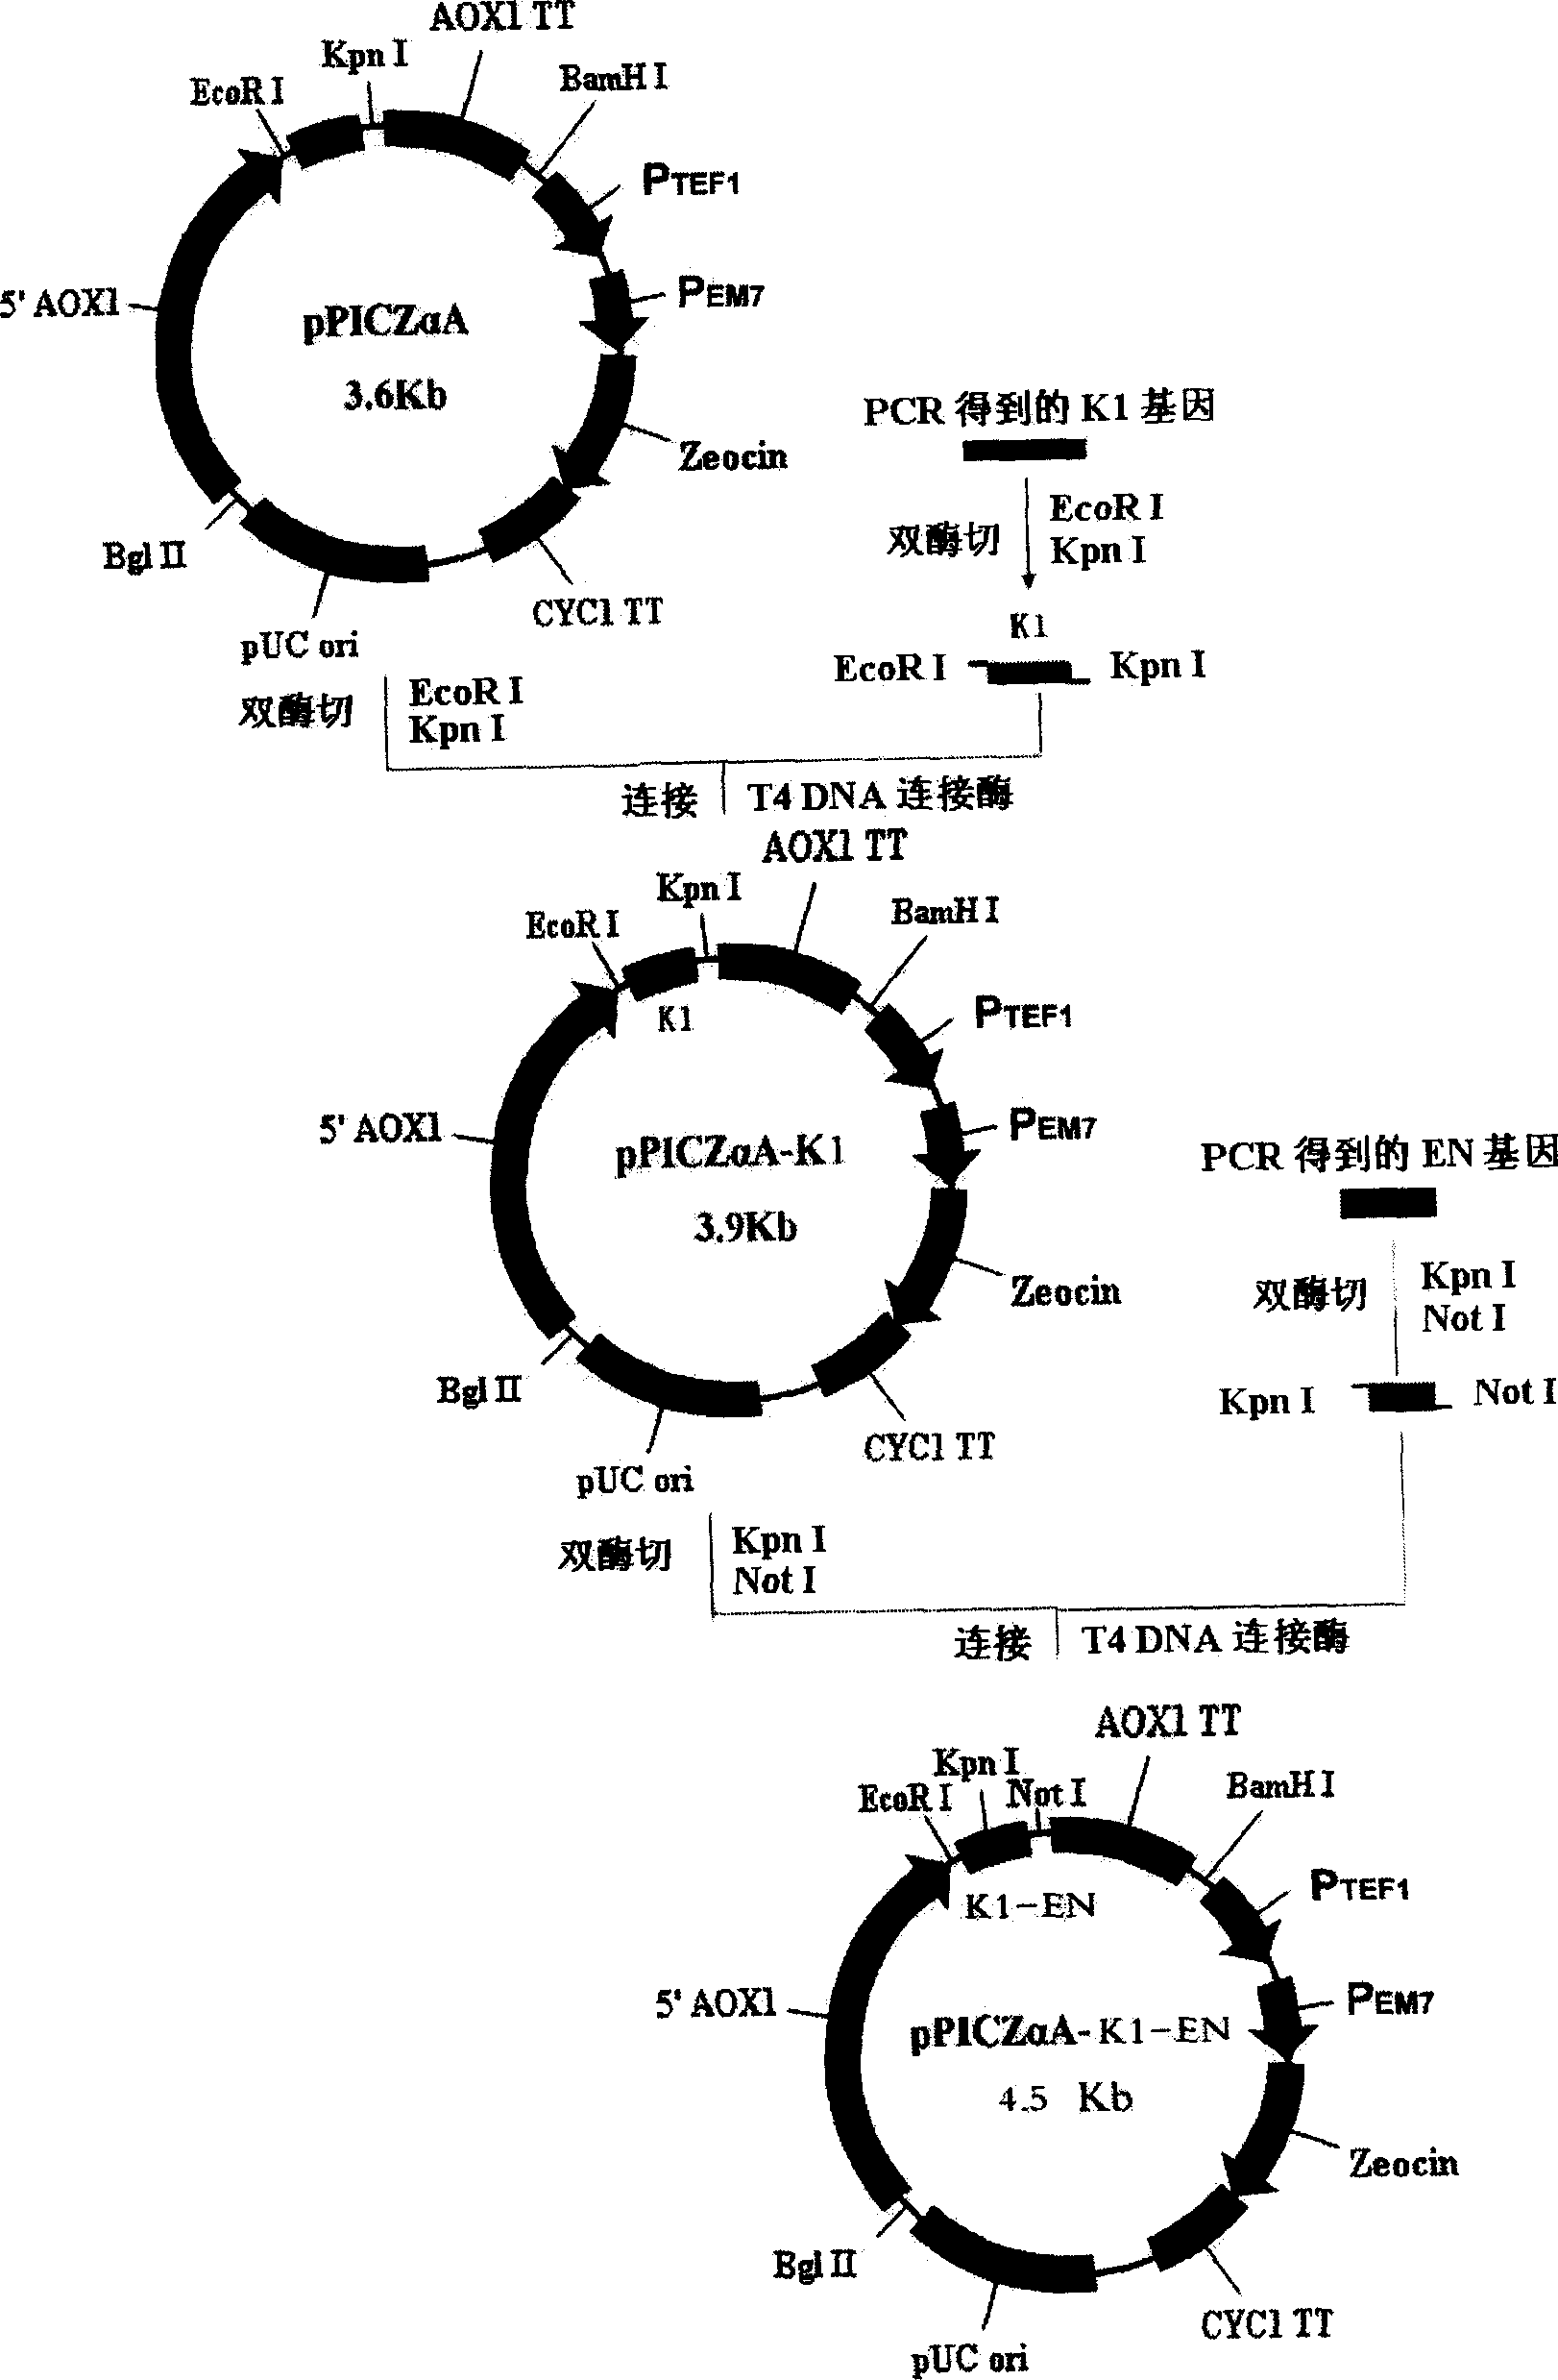 Production of gene recombinant fusion protein K1-EN